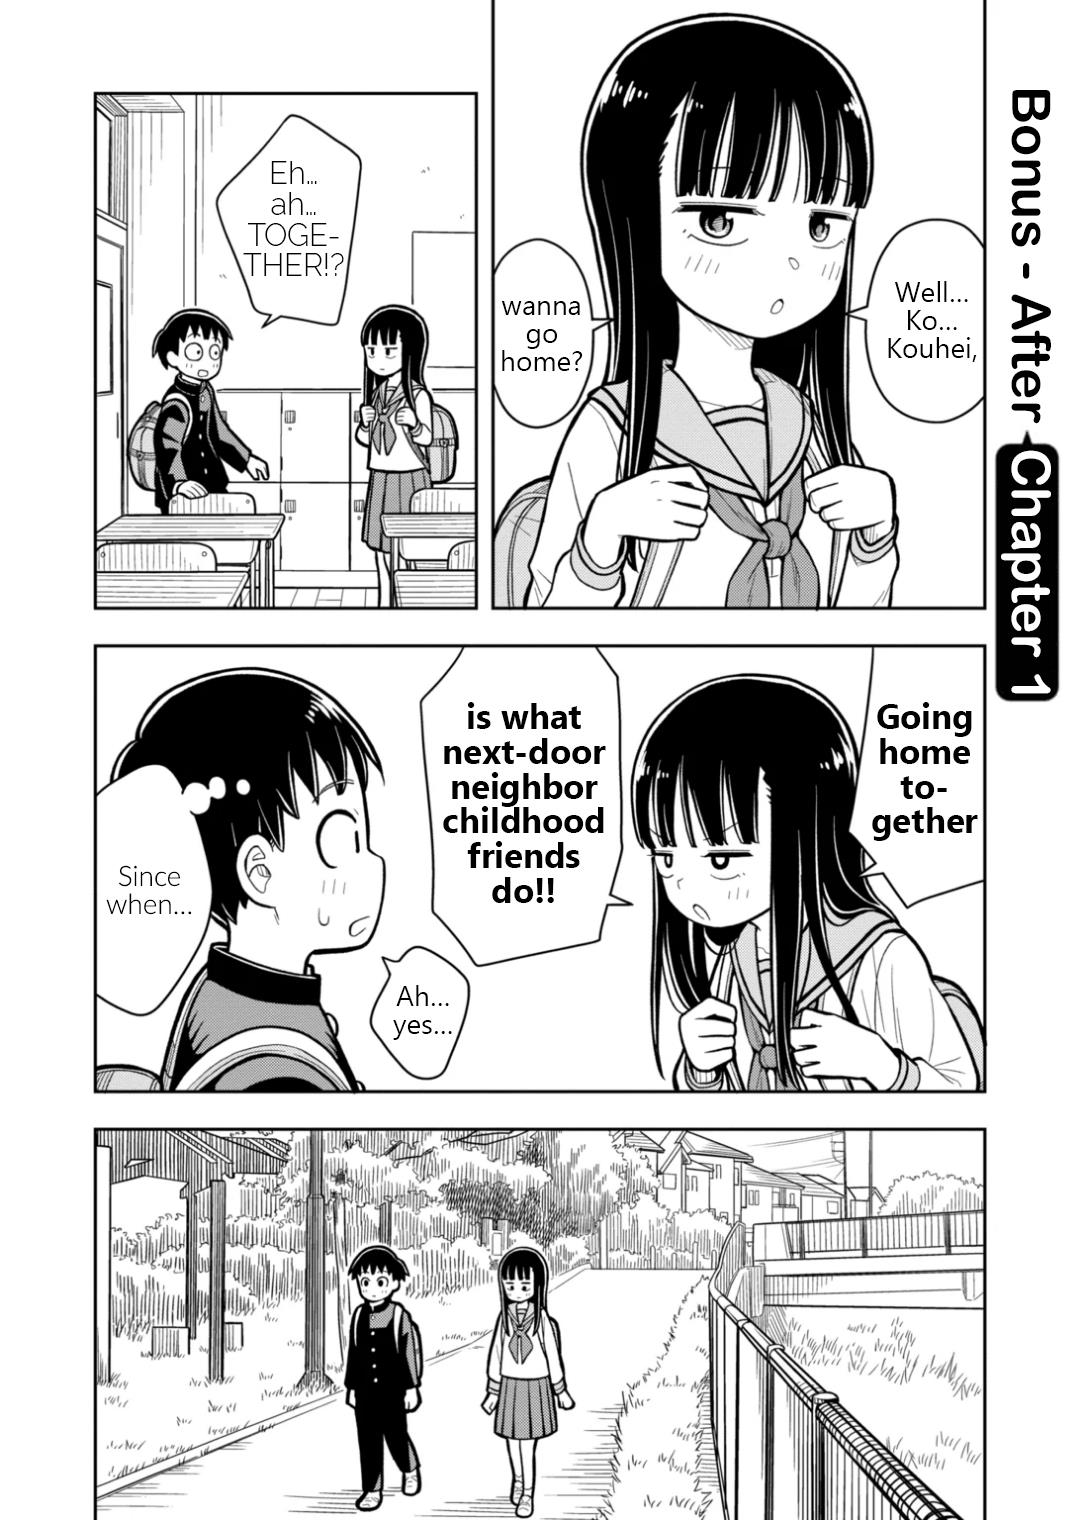 Starting Today She's My Childhood Friend Vol.1 Chapter 9.5